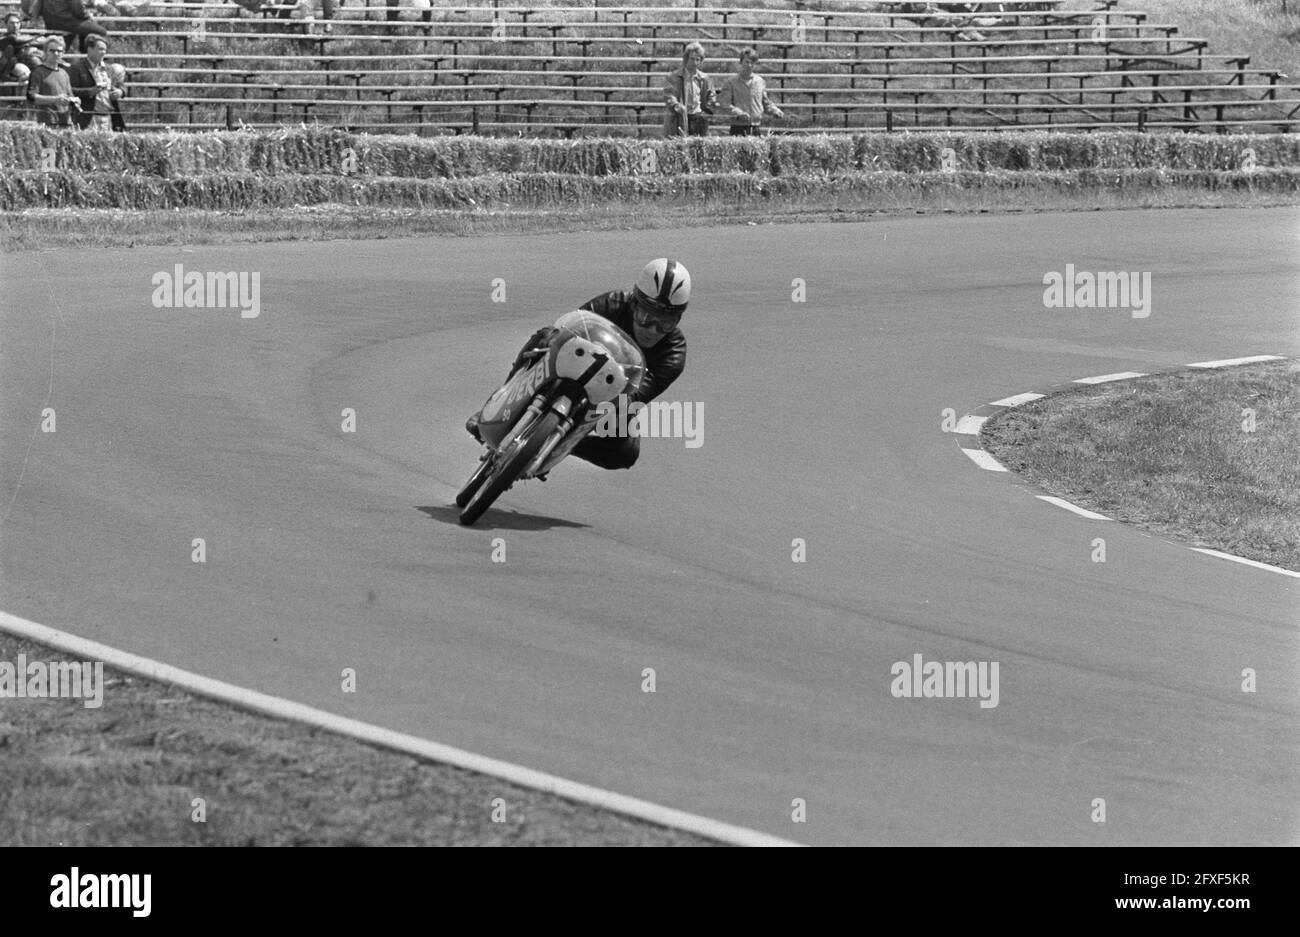 TT races at Assen. Training. 50cc: Angel Nieto on Derbi, June 25, 1970, motorsports, The Netherlands, 20th century press agency photo, news to remember, documentary, historic photography 1945-1990, visual stories, human history of the Twentieth Century, capturing moments in time Stock Photo